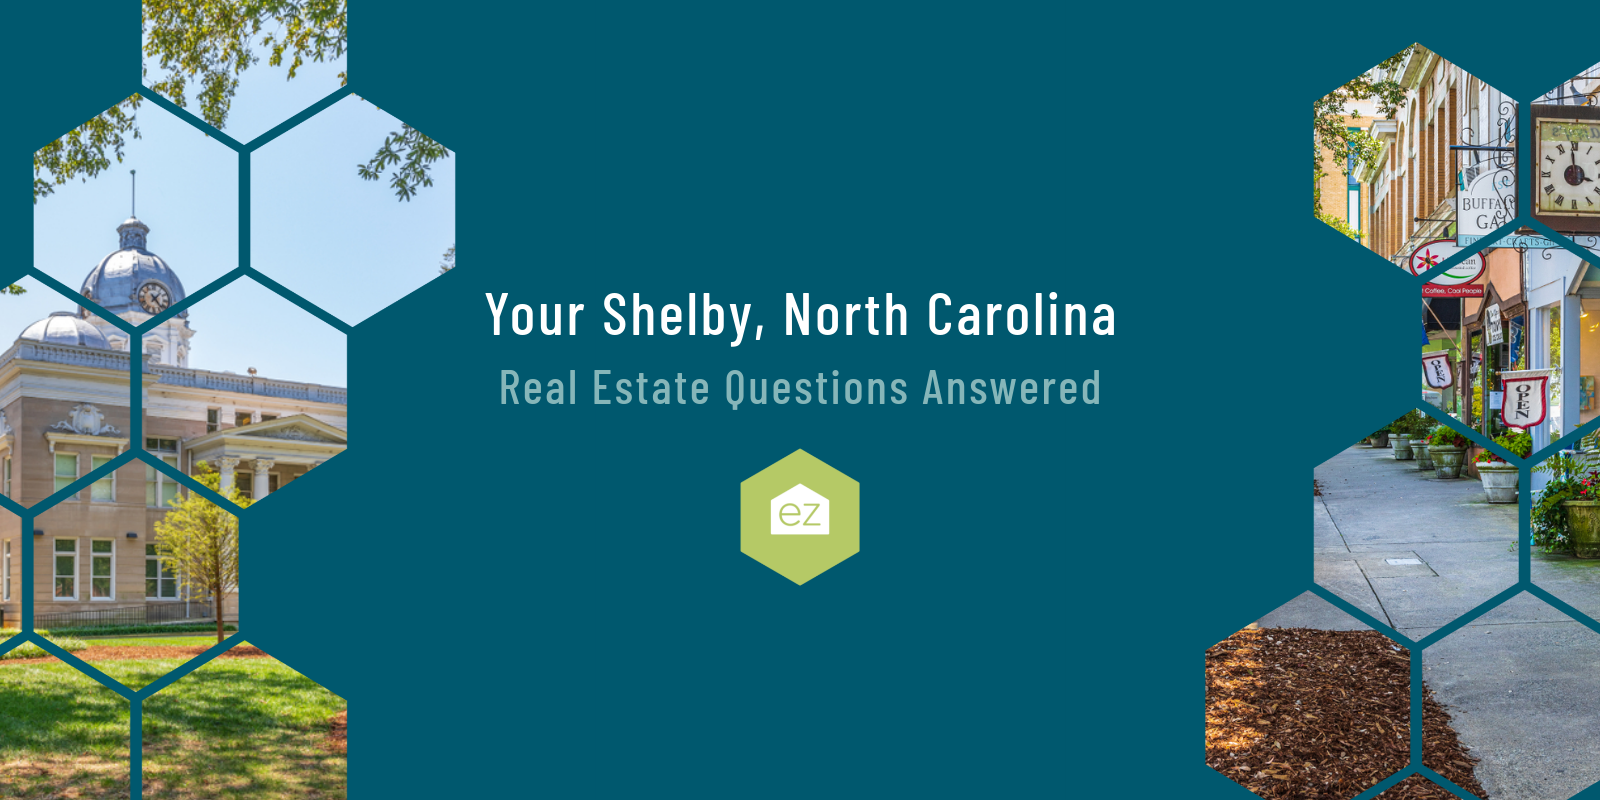 Photos of Shelby, NC Real Estate